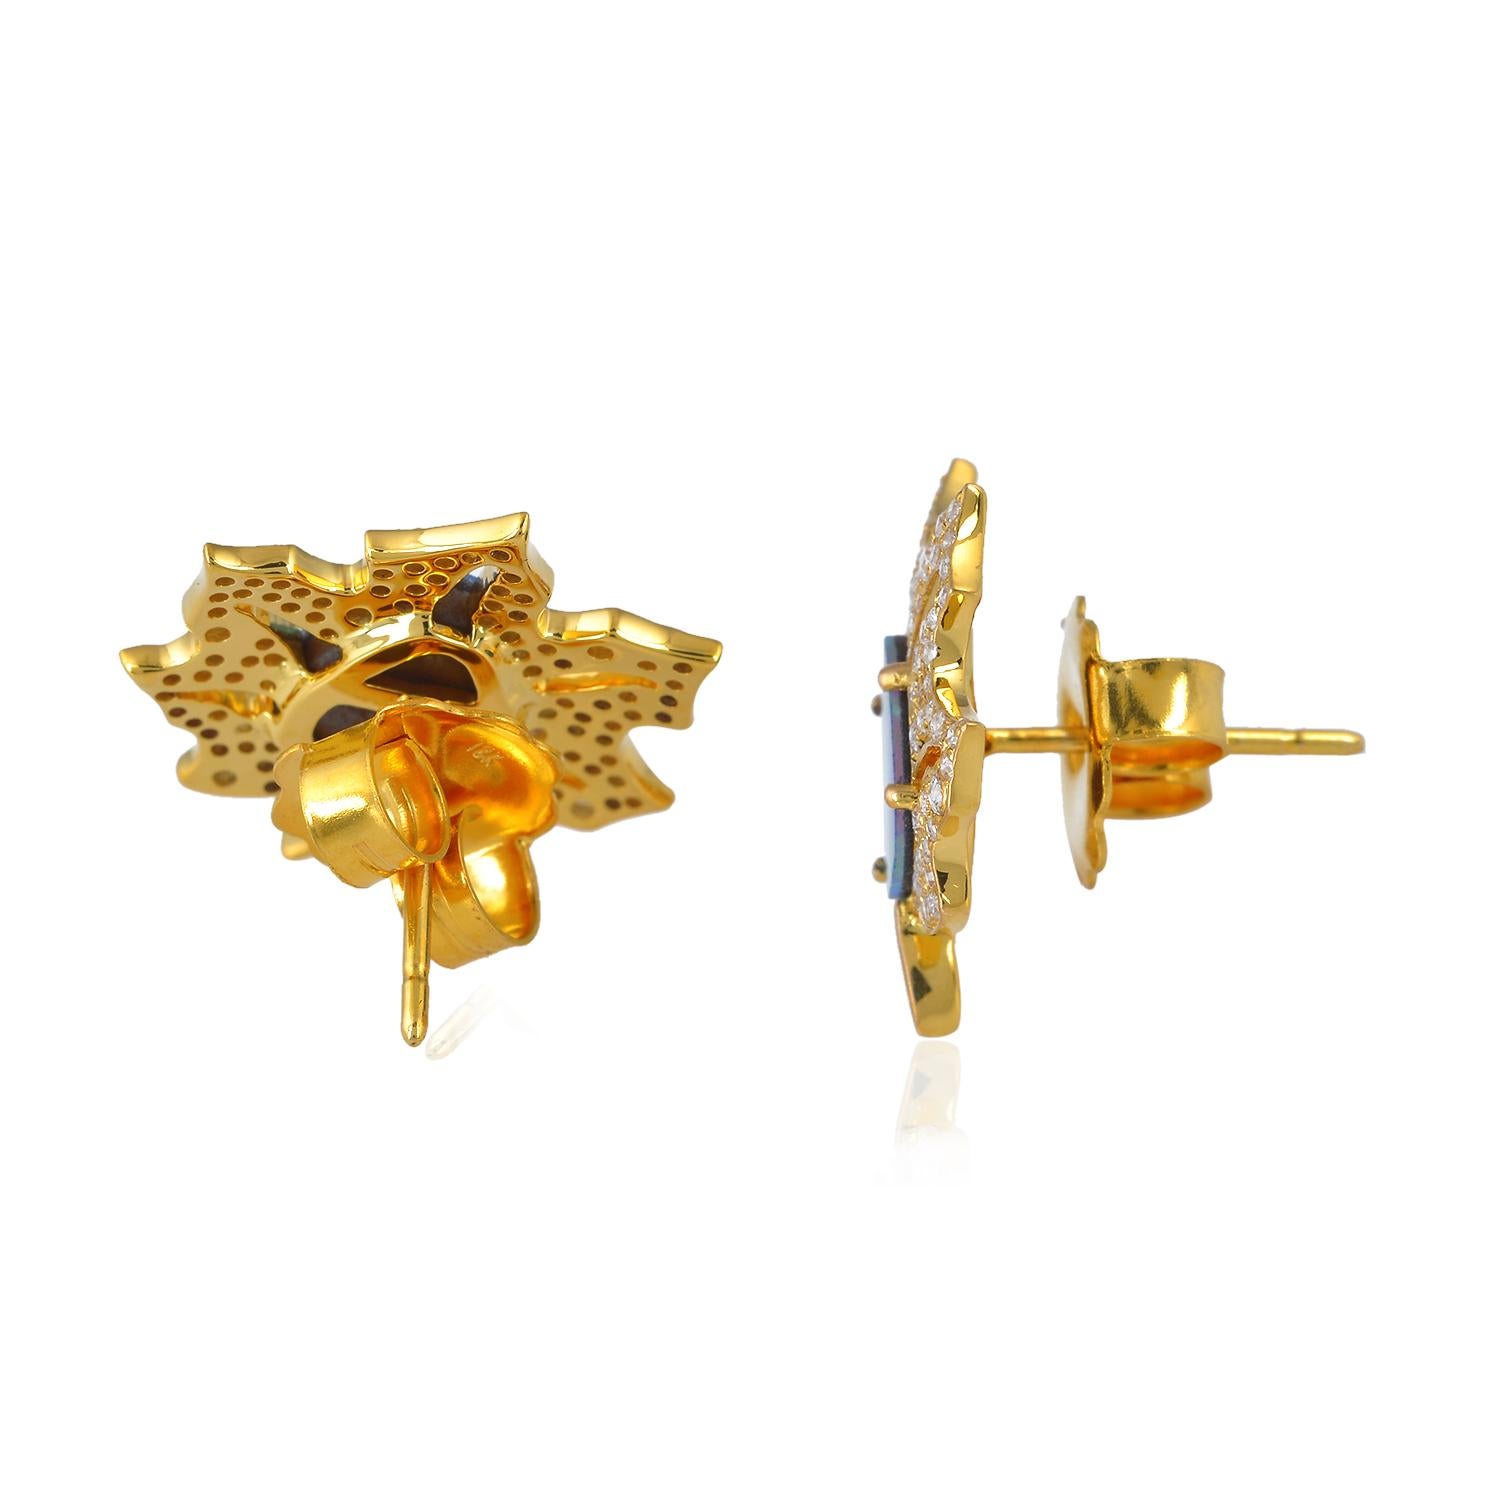 Cast in 18 karat gold, these beautiful stud earrings are hand set with 2.25 carats opal doublets & .79 carats of diamonds 

FOLLOW  MEGHNA JEWELS storefront to view the latest collection & exclusive pieces.  Meghna Jewels is proudly rated as a Top